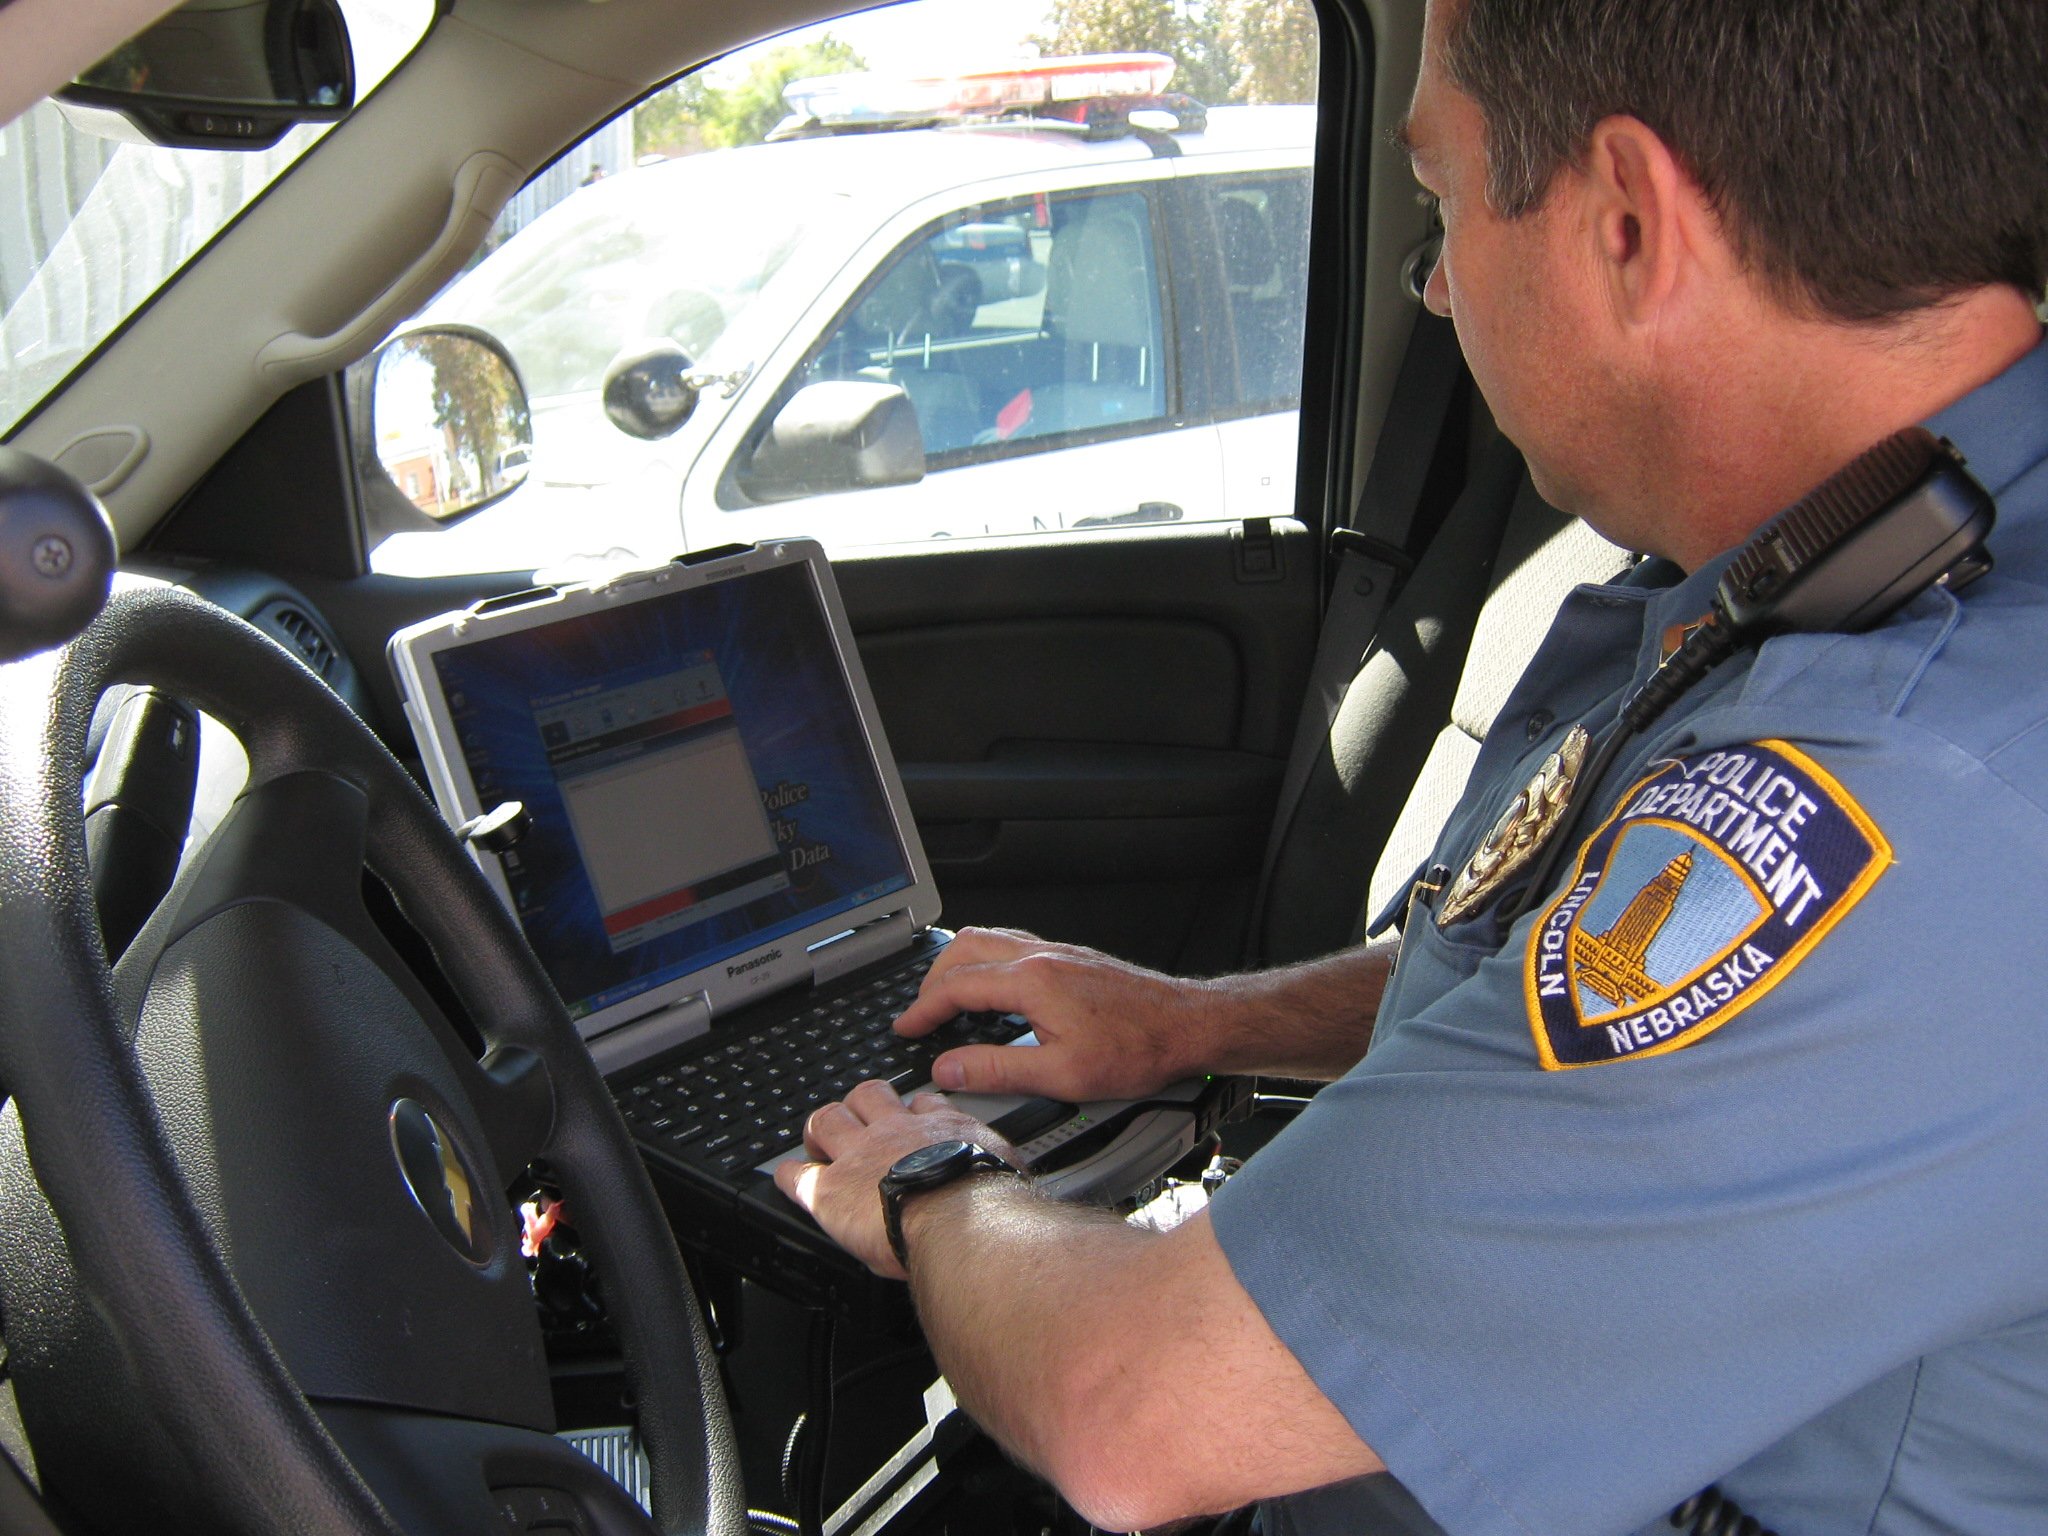 Researchers to track technology, find best tool to aid police ...